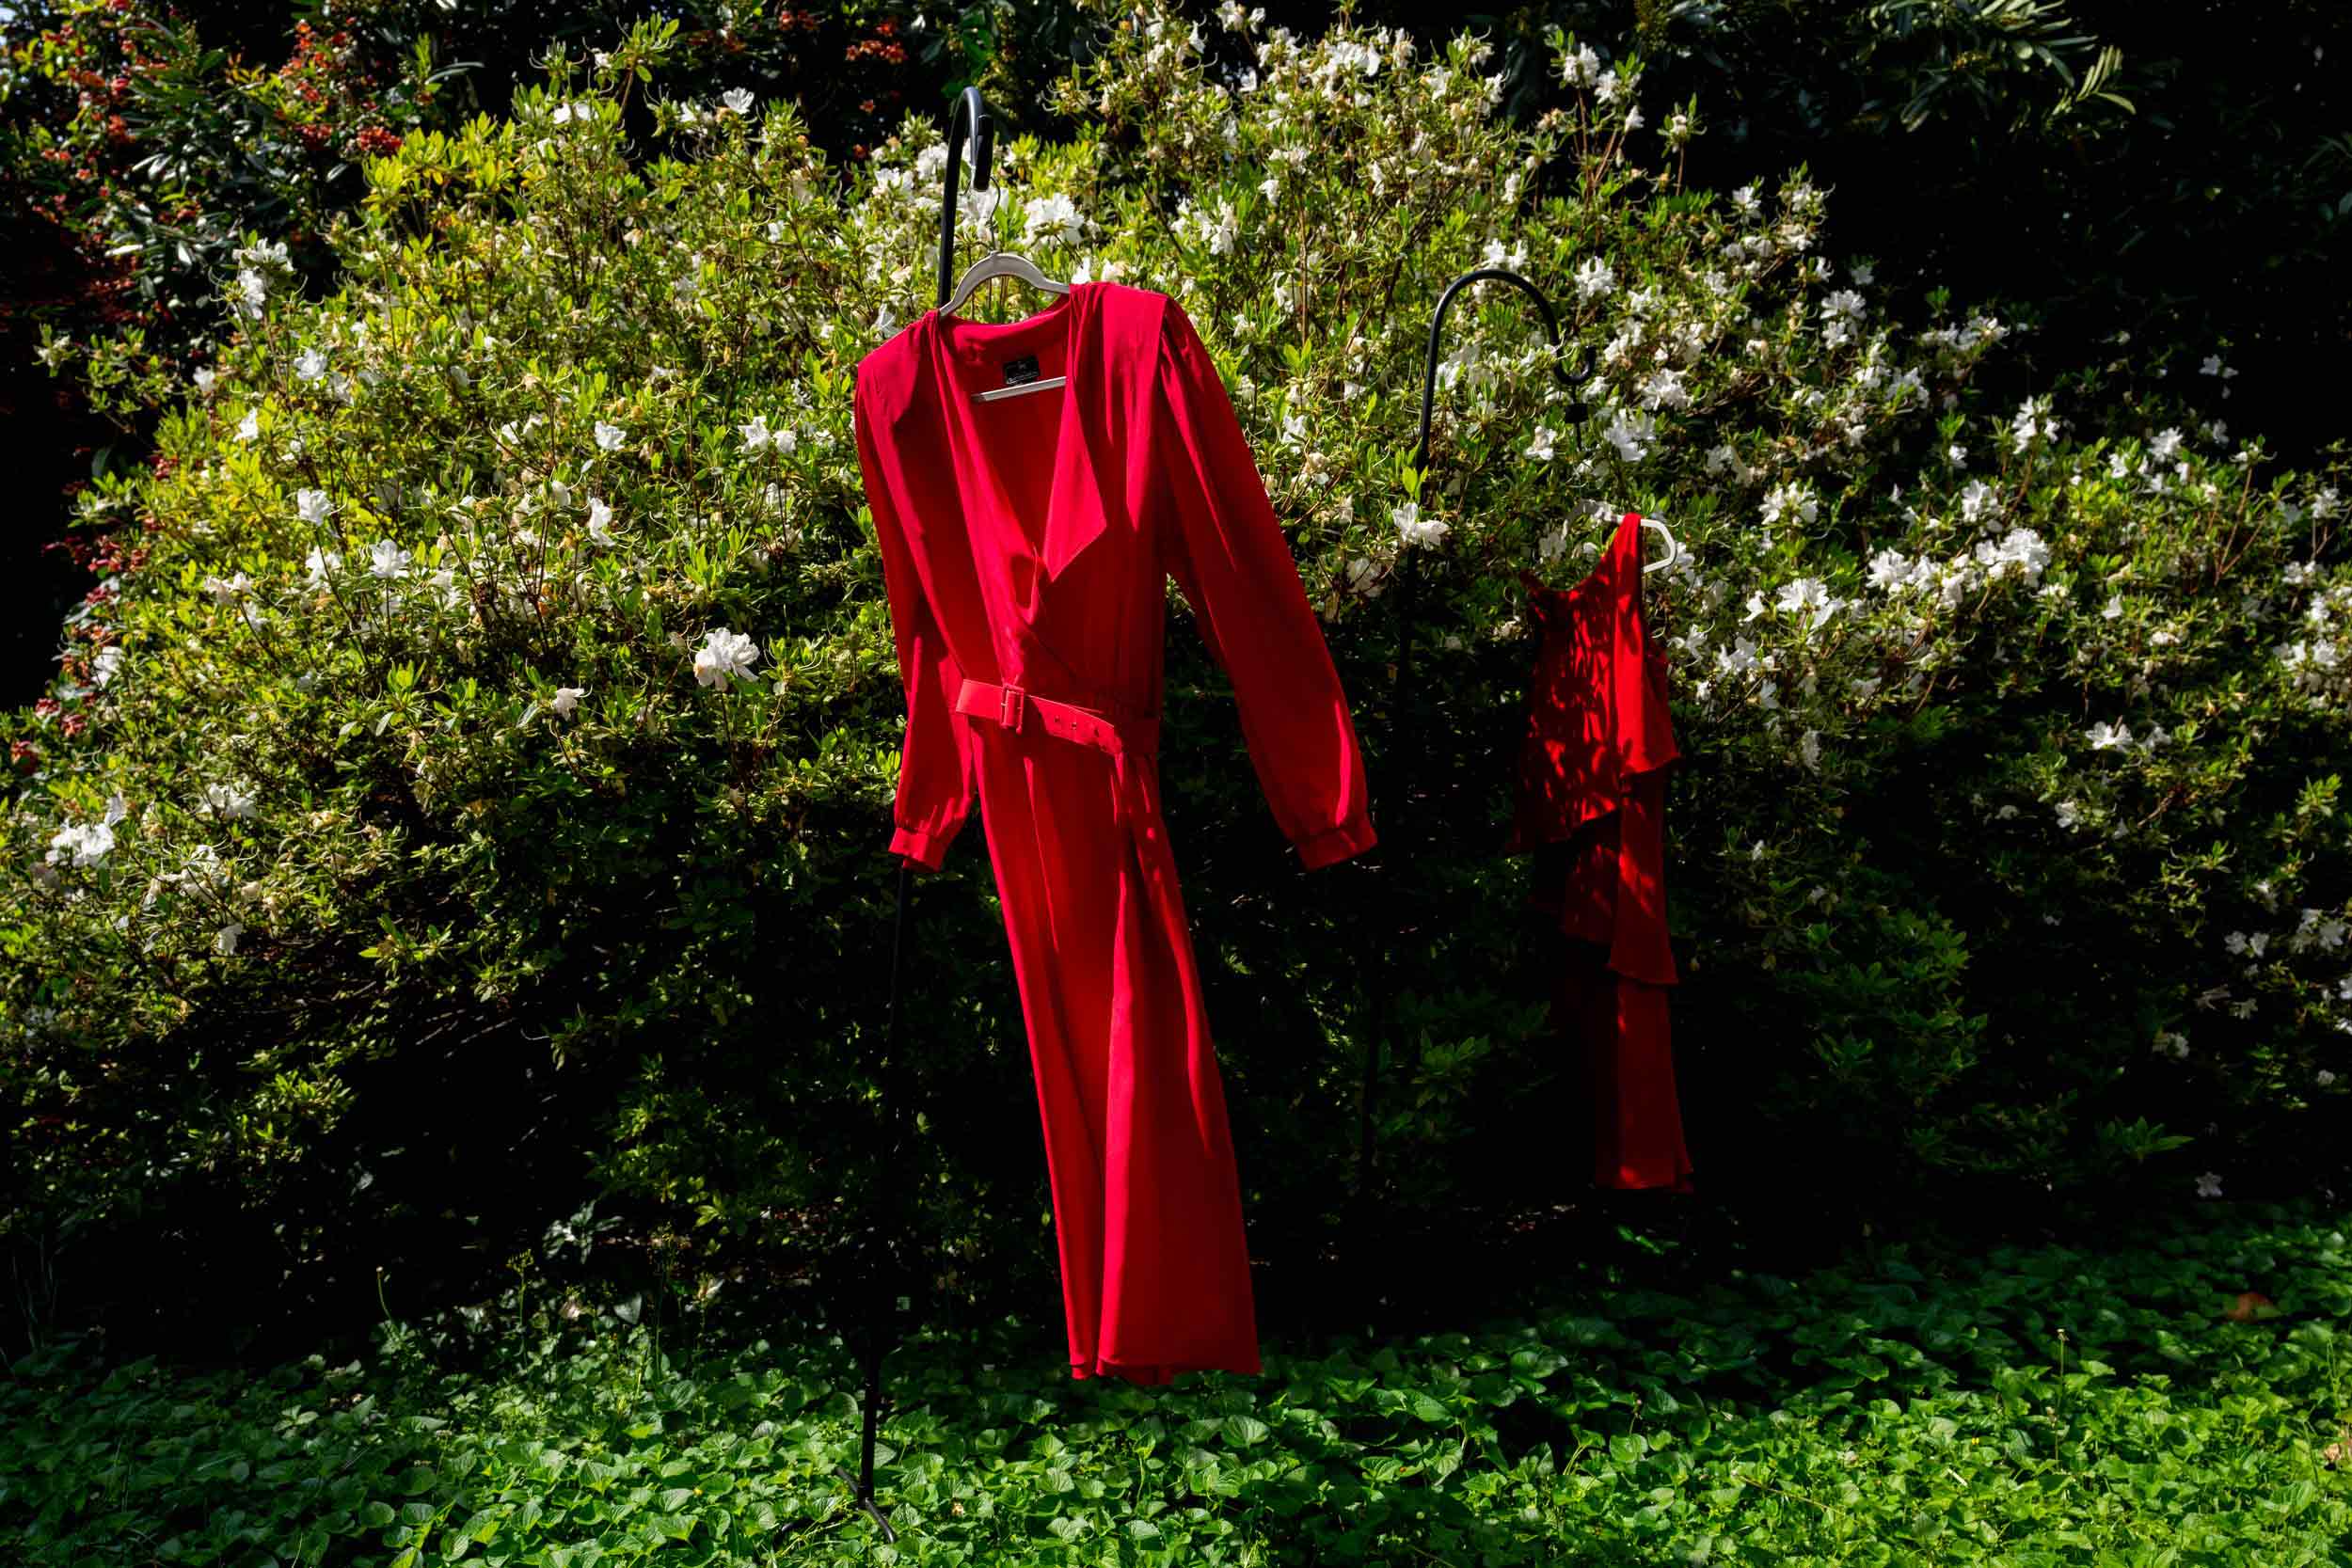 Red dresses blowing in the breeze 